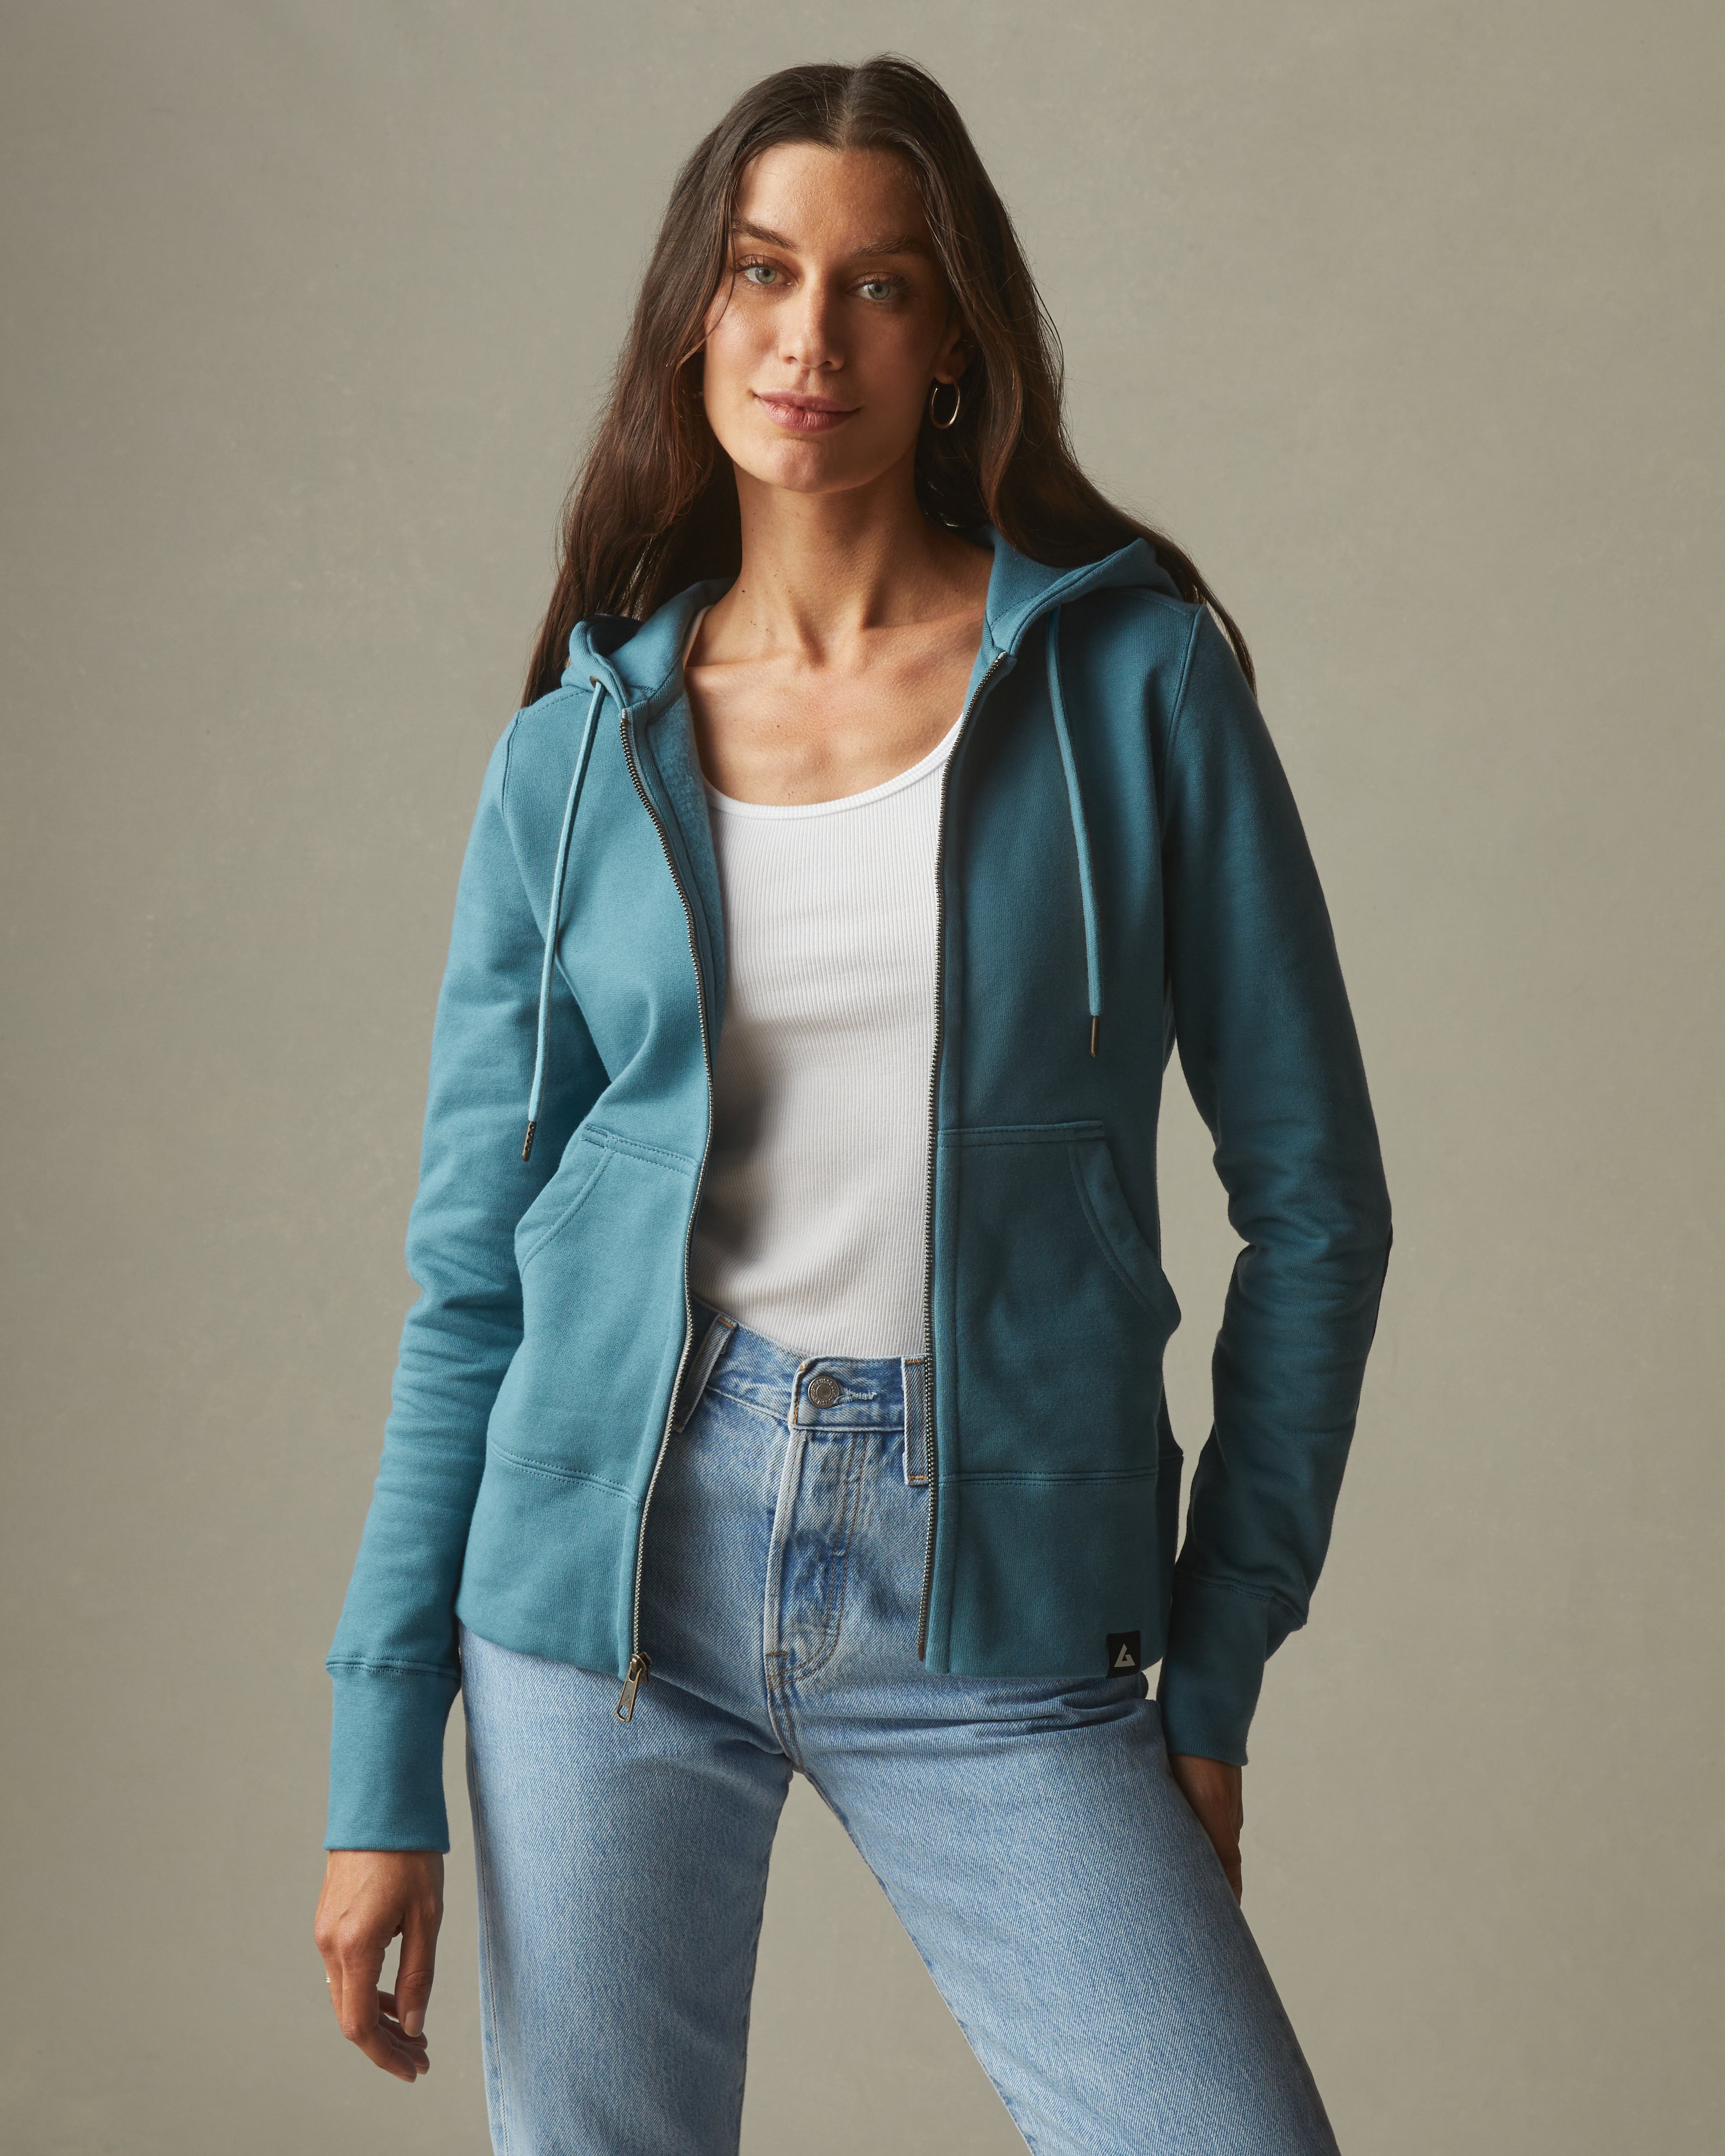 My Favorite 37 Hoodie Outfit Ideas 2020  Jacket outfit women, Oversized denim  jacket outfit, Denim jacket outfit women